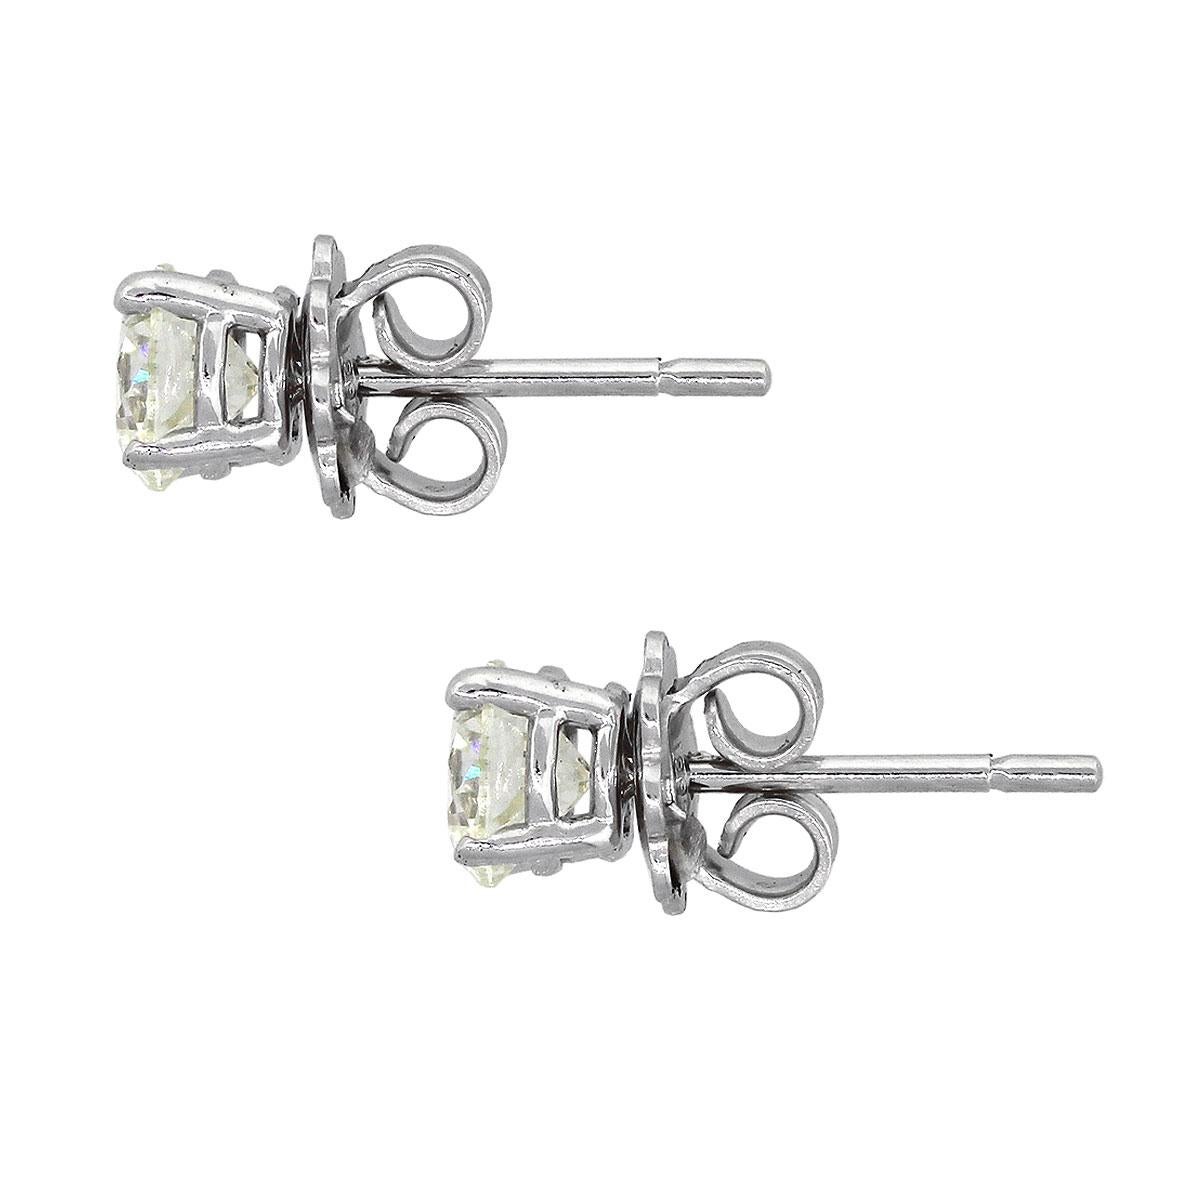 Material: 14k white gold
Diamond Details: Approx. 1.55ctw of round brilliant diamonds. Diamonds are G/H in color and SI in clarity
Measurements: 0.60″ x 0.22″ x 0.22″
Earrings Backs: Tension post
Total Weight: 2.1g (1.4dwt)
SKU: A30312447